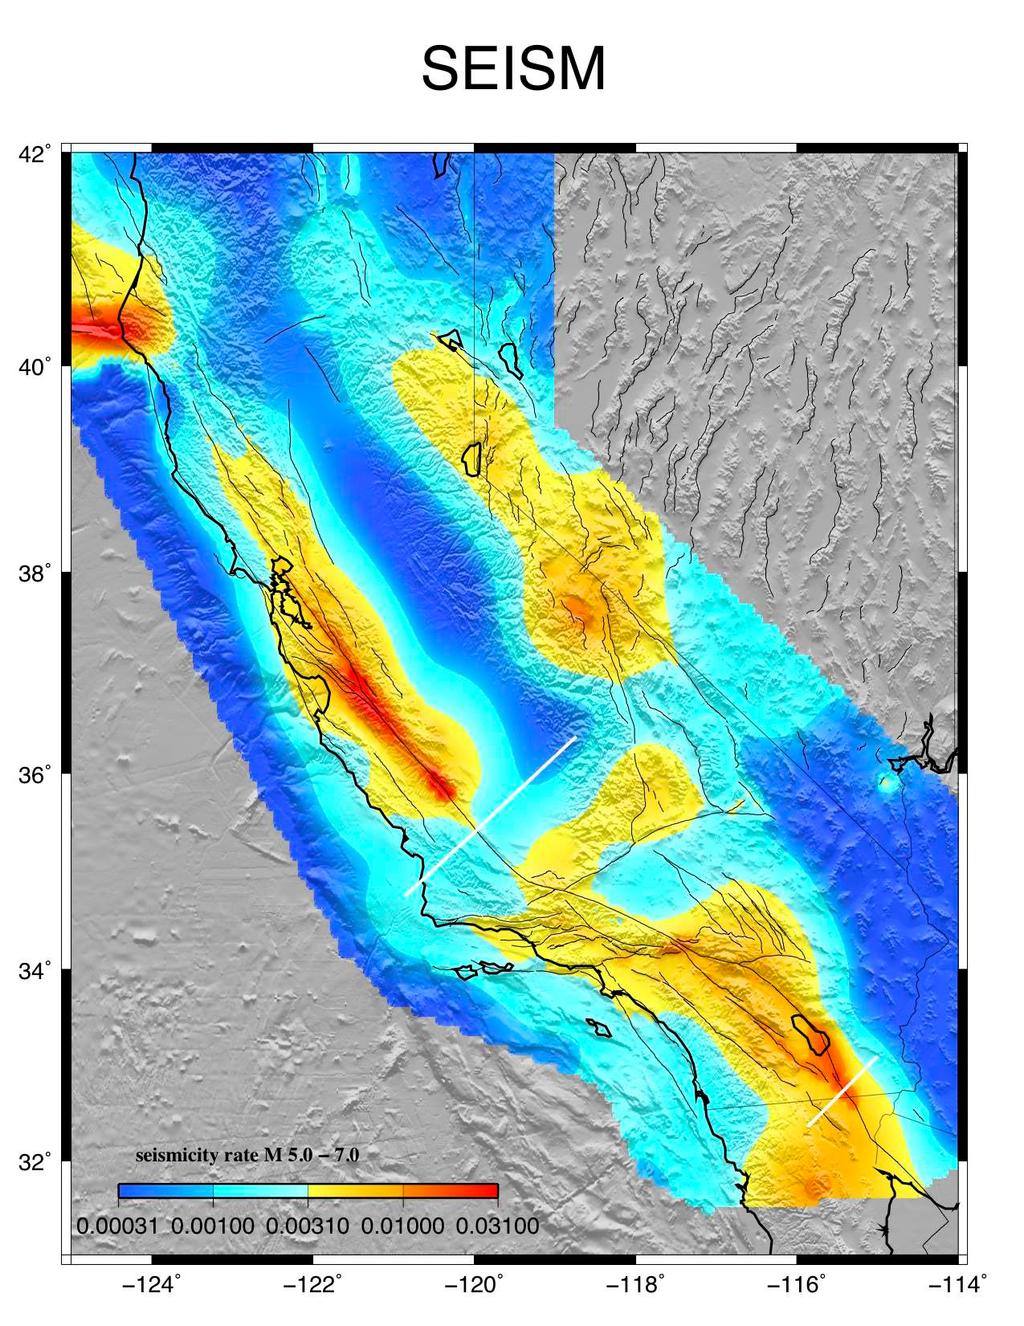 The background seismicity model is included to account for M 5.0-6.5 earthquakes on faults and for random M 5.0 7.